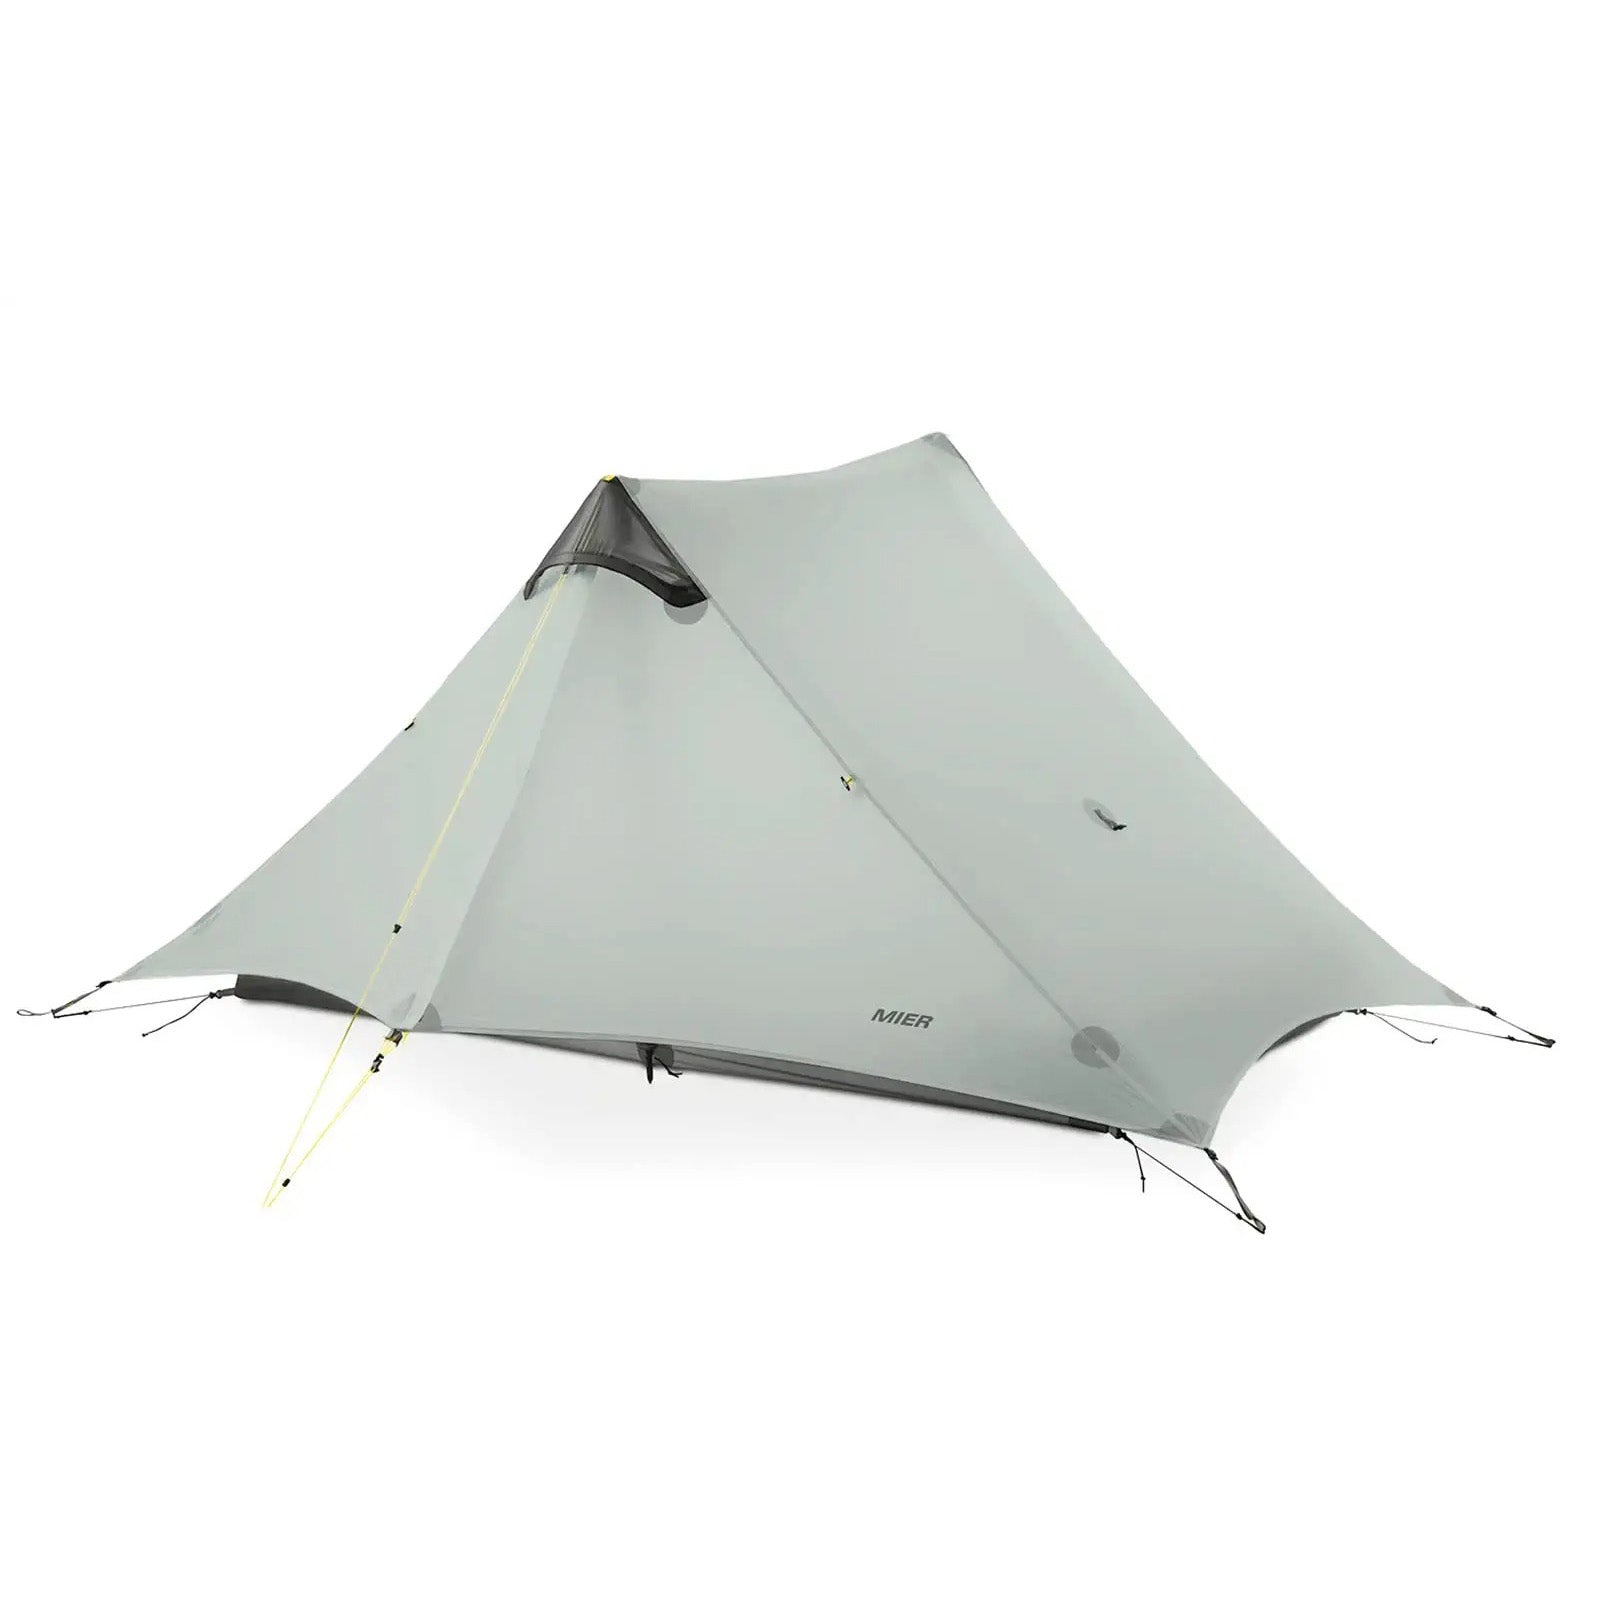 Lanshan 1-2 Person Camping Tent Rainfly/Inner Tent Tent Accessories MIER